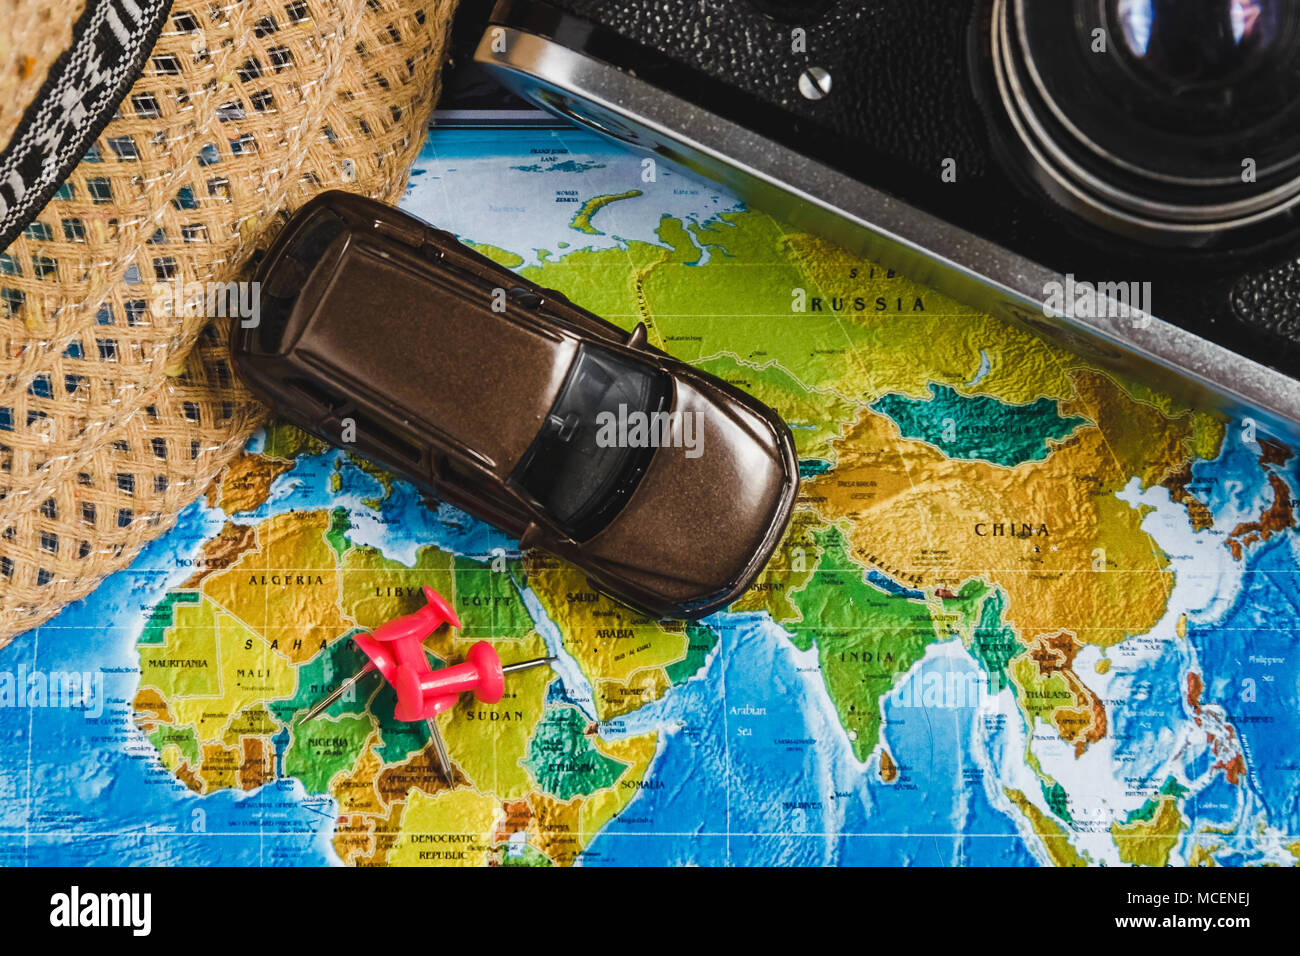 Automotive Travel Destination Points on World Map Indicated with Colorful Thumbtacks, Red Rope and Shallow Depth of Field Stock Photo